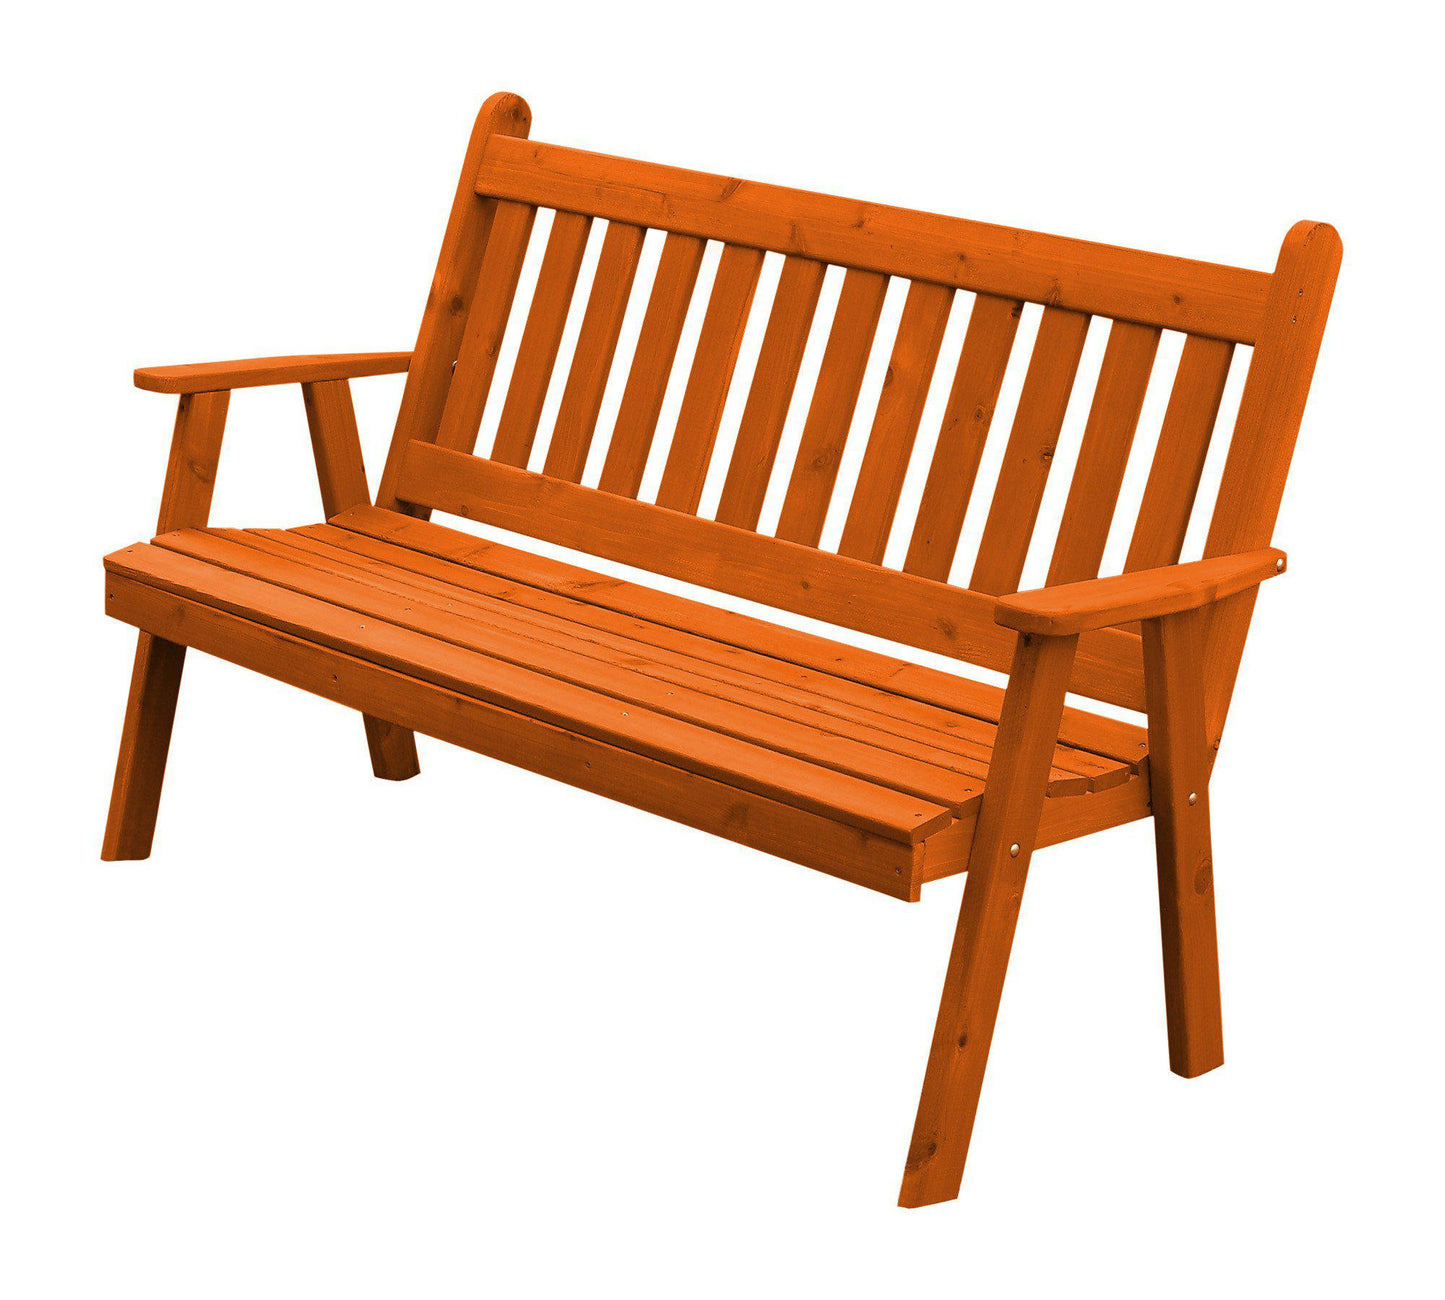 A&L Furniture Co. Western Red Cedar 4' Traditional English Garden Bench - LEAD TIME TO SHIP 2 WEEKS